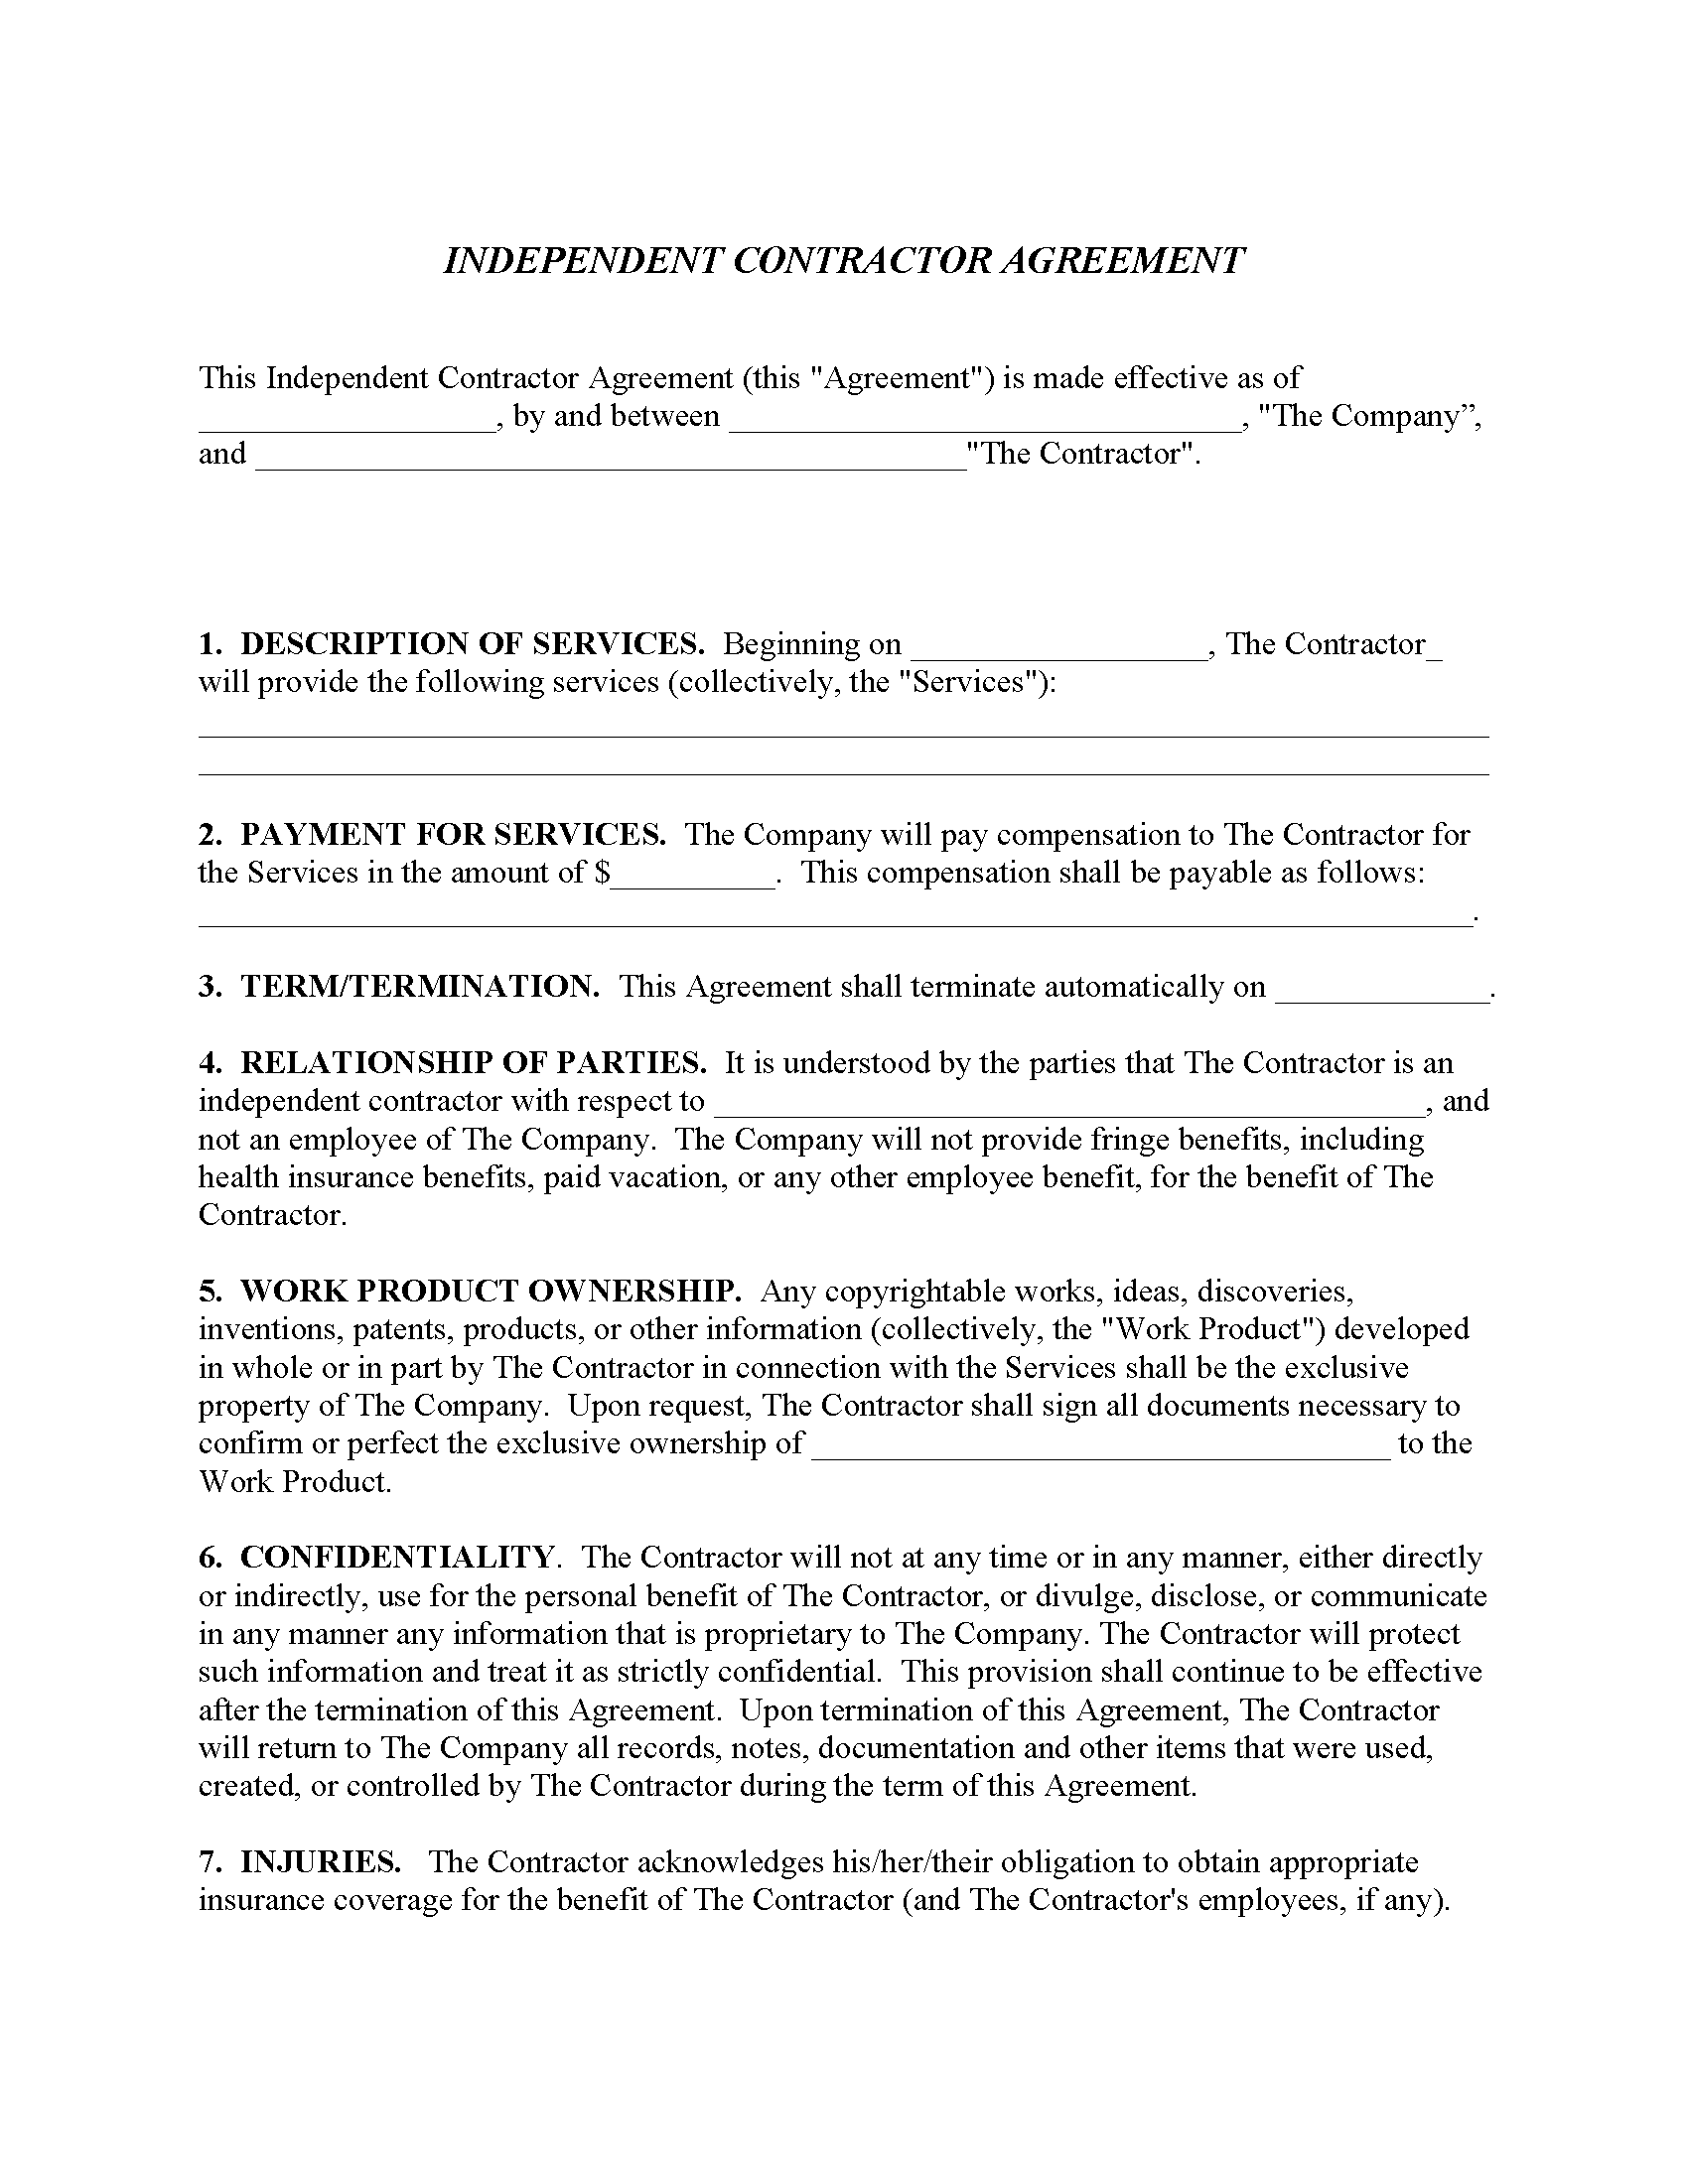 nevada-independent-contractor-agreement-form-free-printable-legal-forms